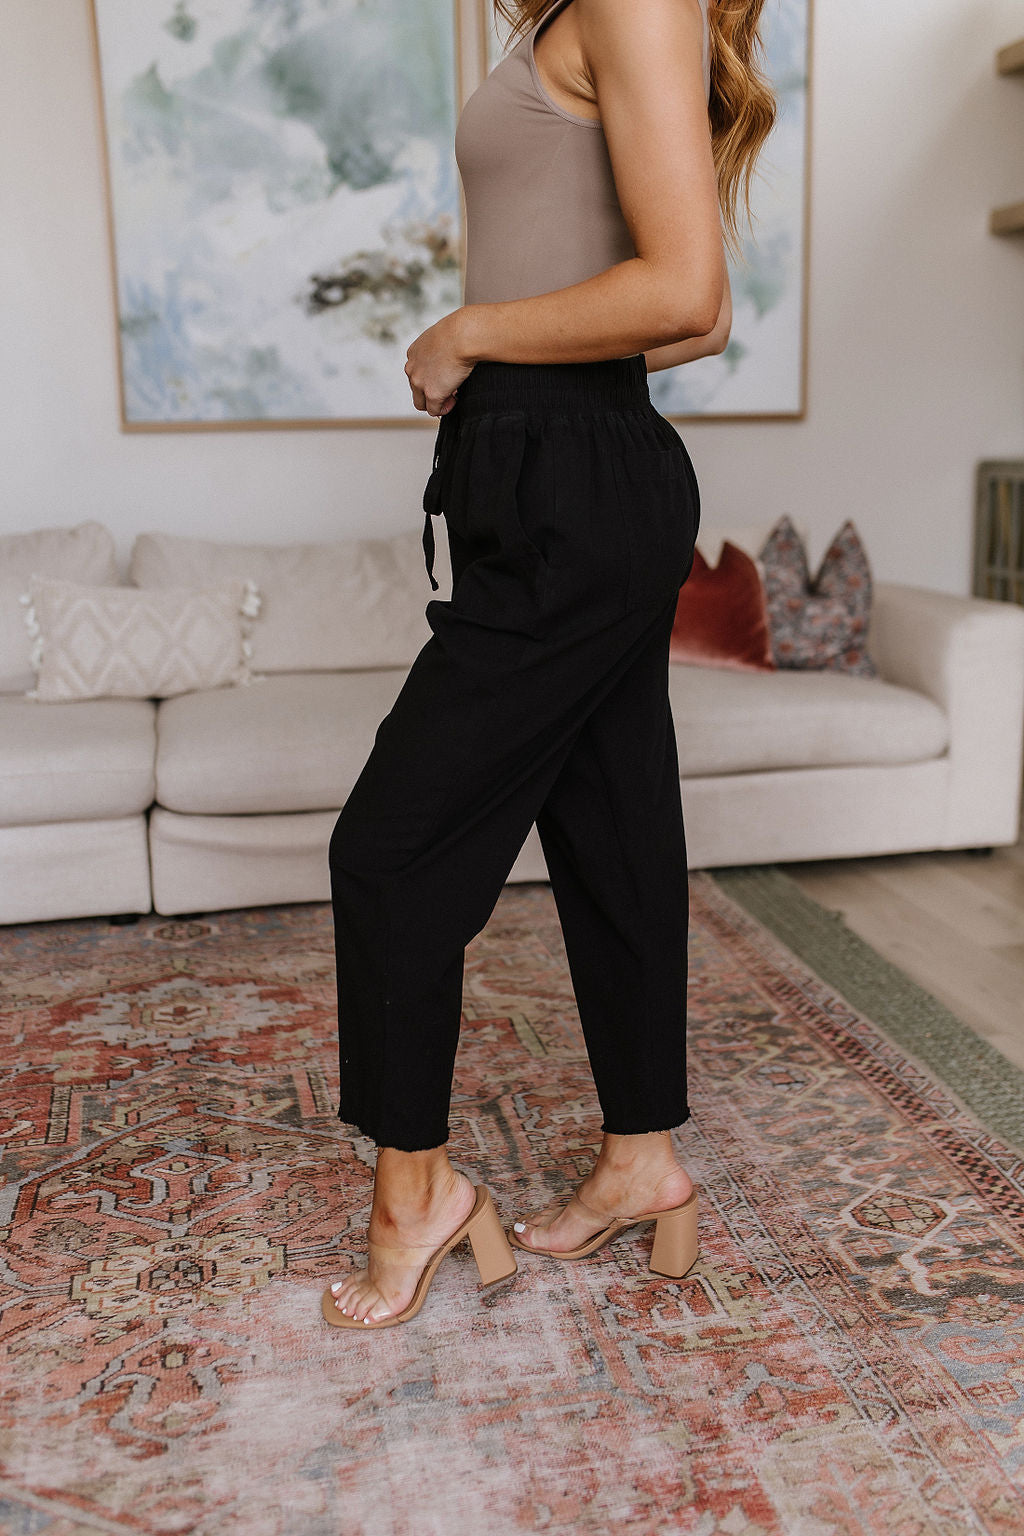 Love Me Dearly High Waisted Pants in Black-Pants-Inspired by Justeen-Women's Clothing Boutique in Chicago, Illinois